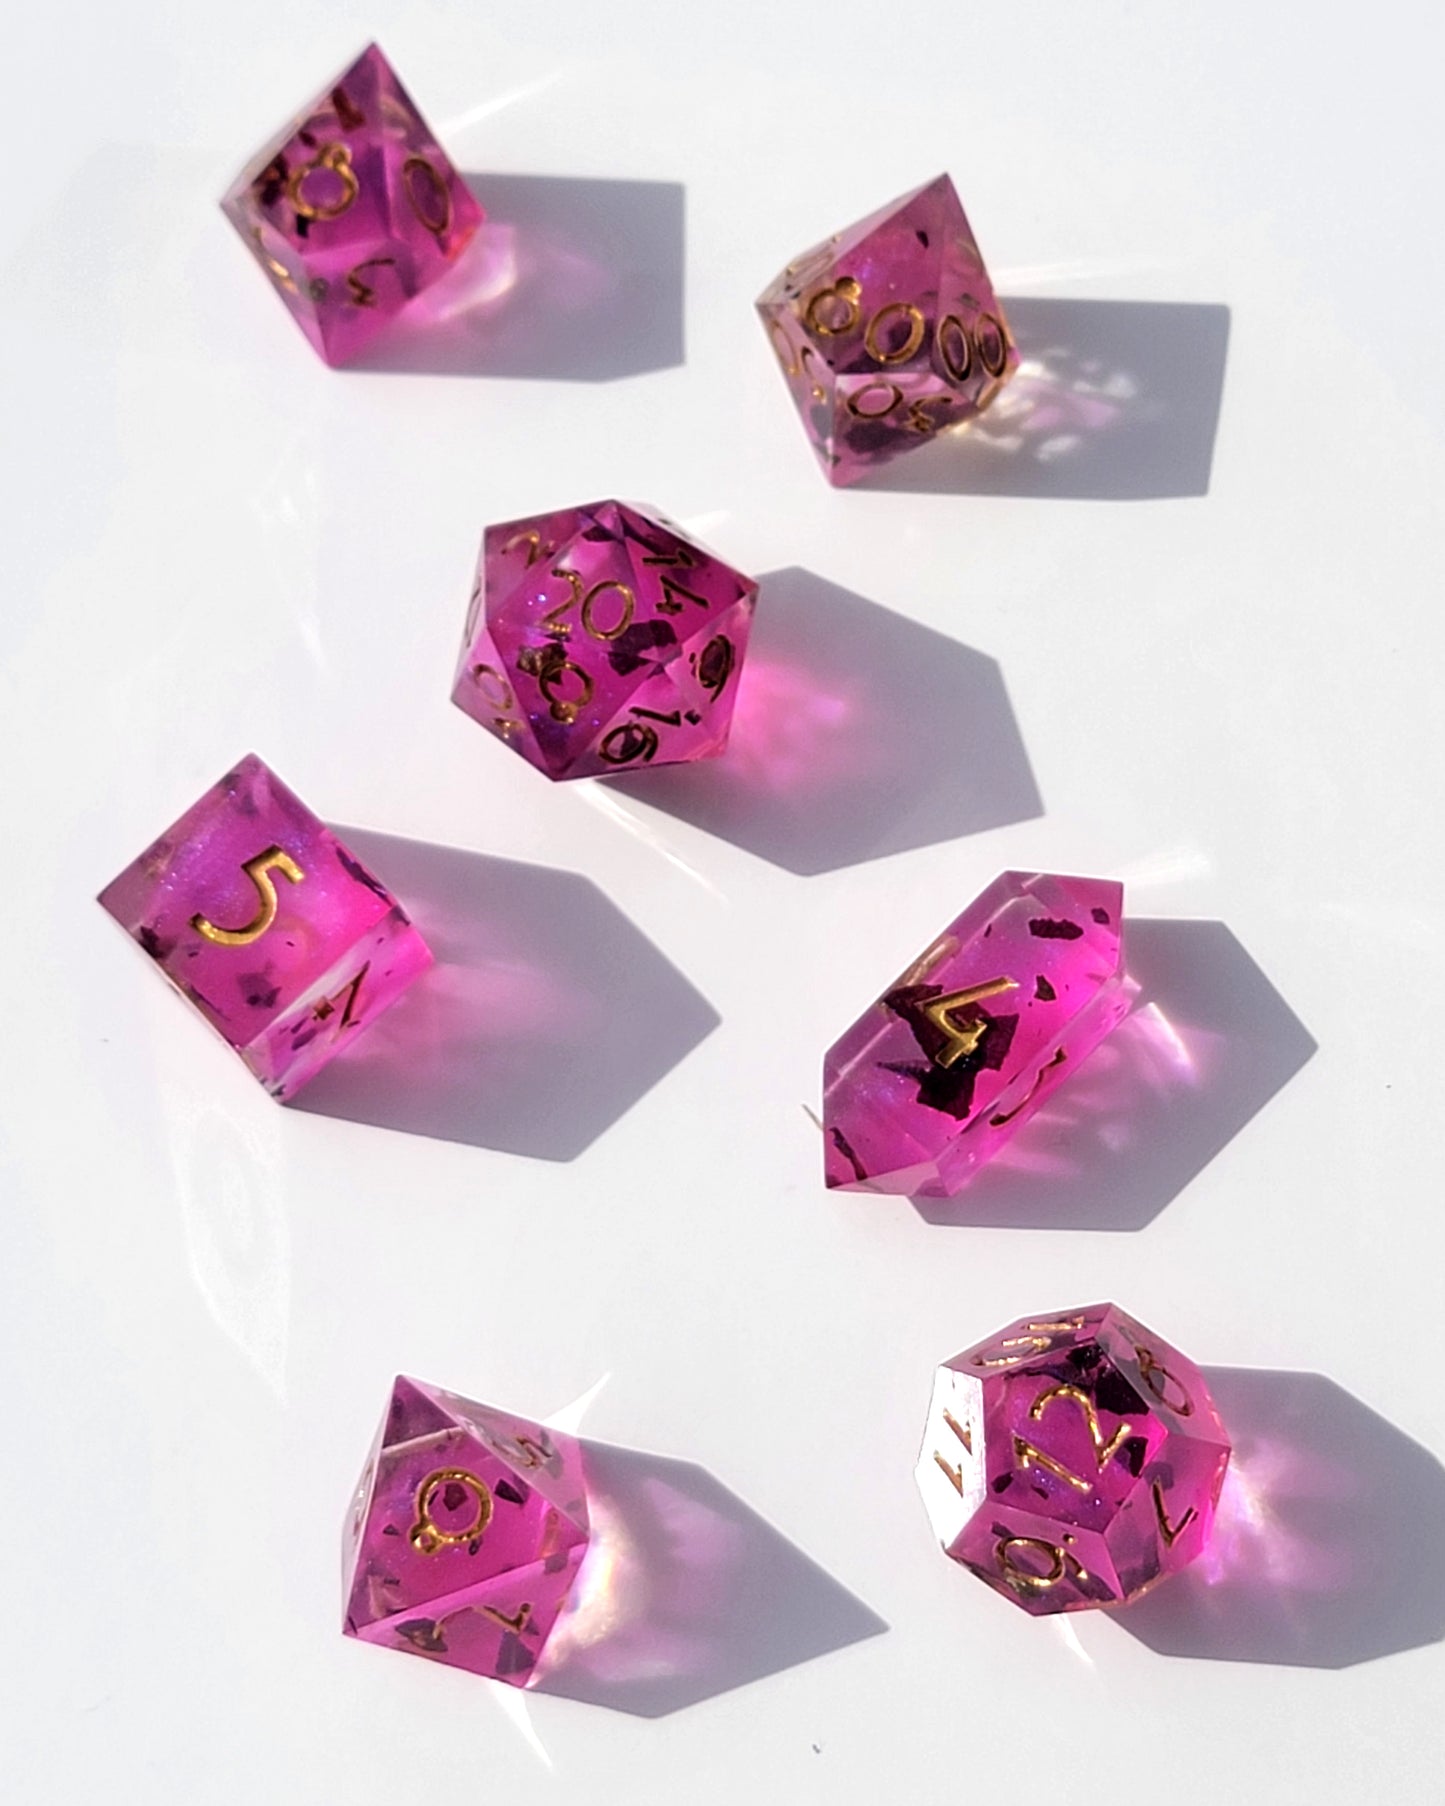 Pursuit of Romance - 7 Piece handmade D&D Dice| Hand Crafted Dungeons and Dragons Dice